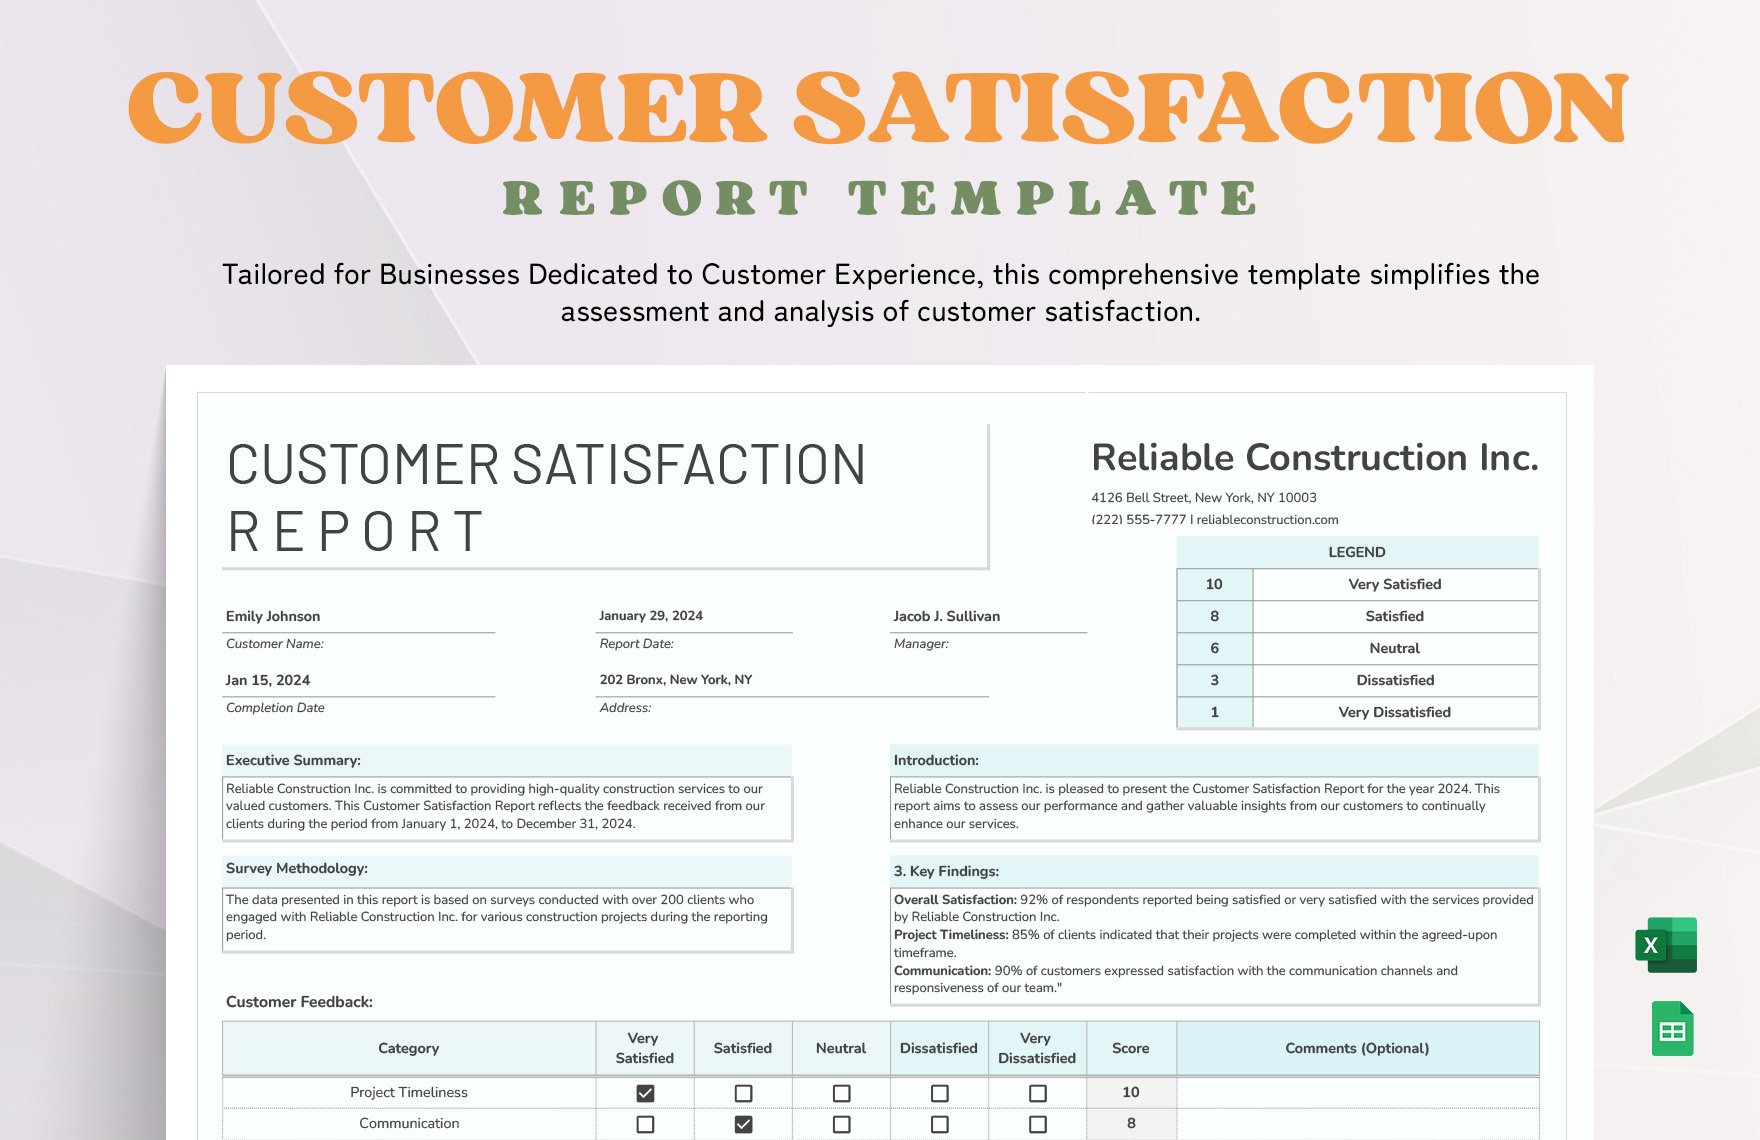 Free Customer Satisfaction Report Template in Excel, Google Sheets